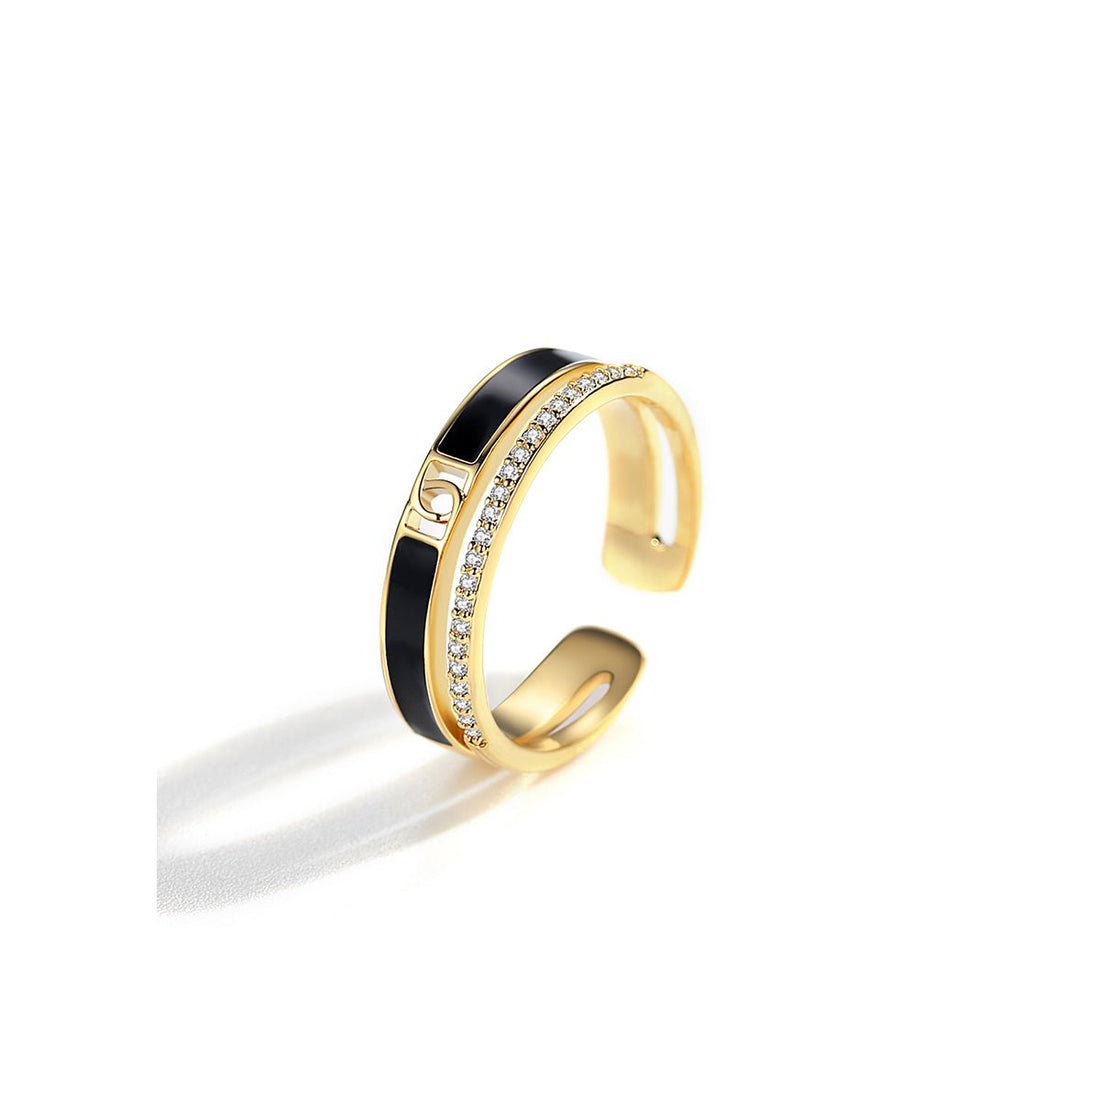 Fear Of Love Gold Ring - 0cm